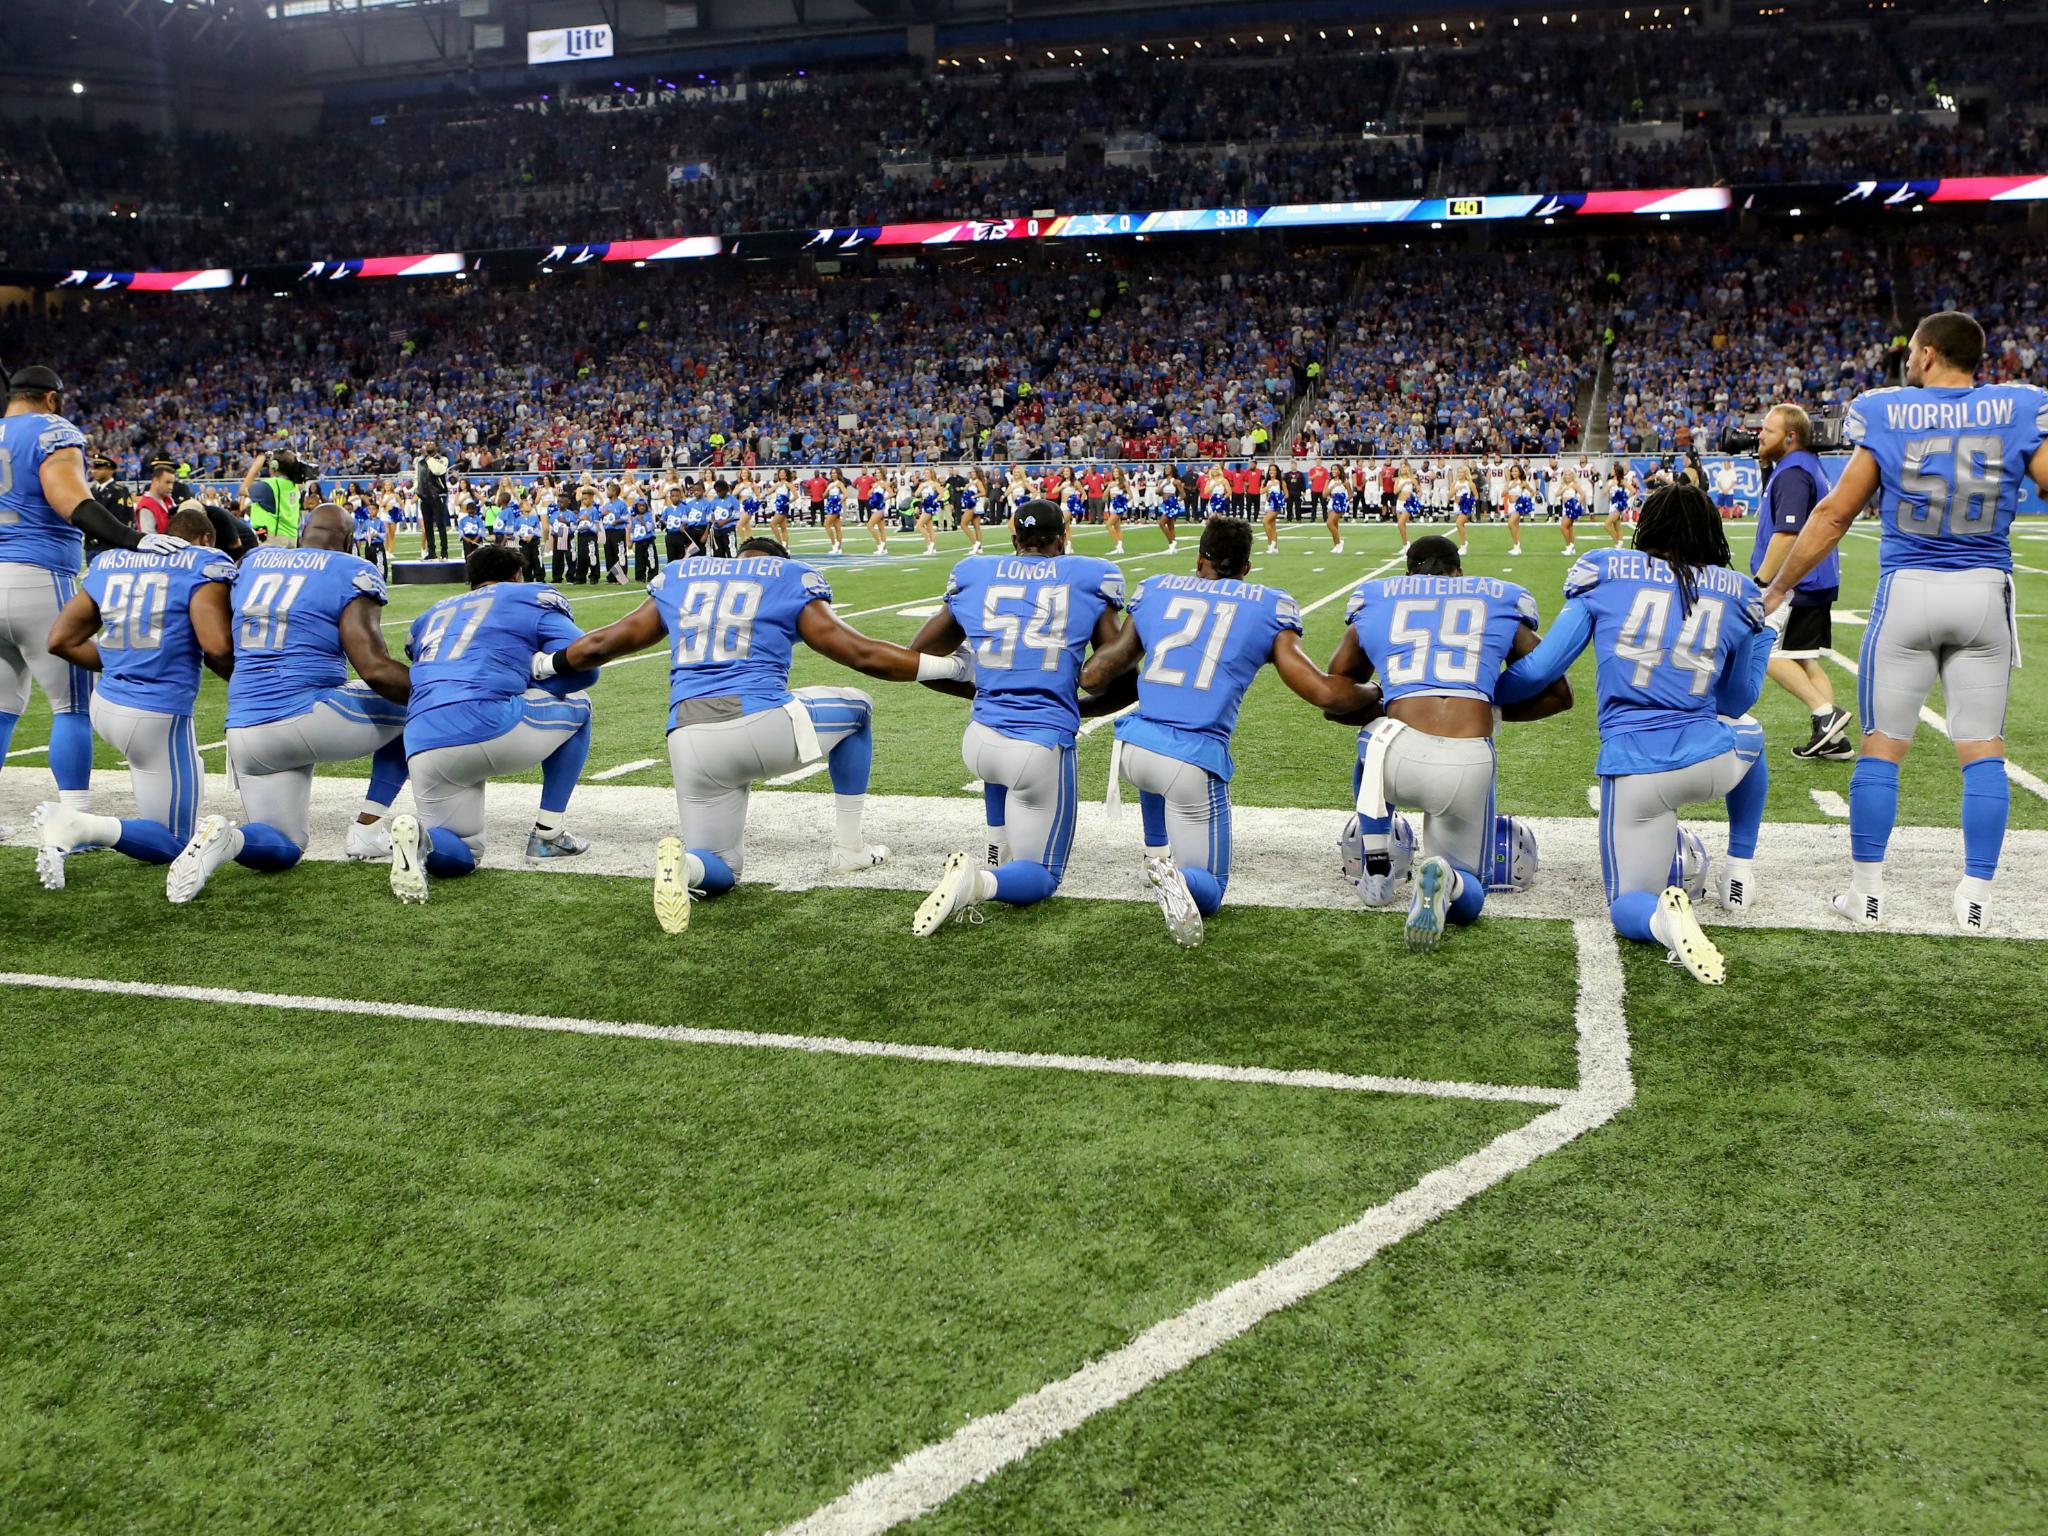 Members of the Detroit Lions take a knee during the playing of the national anthem prior to the start of the game against the Atlanta Falcons in Detroit, Michigan on 24 September.